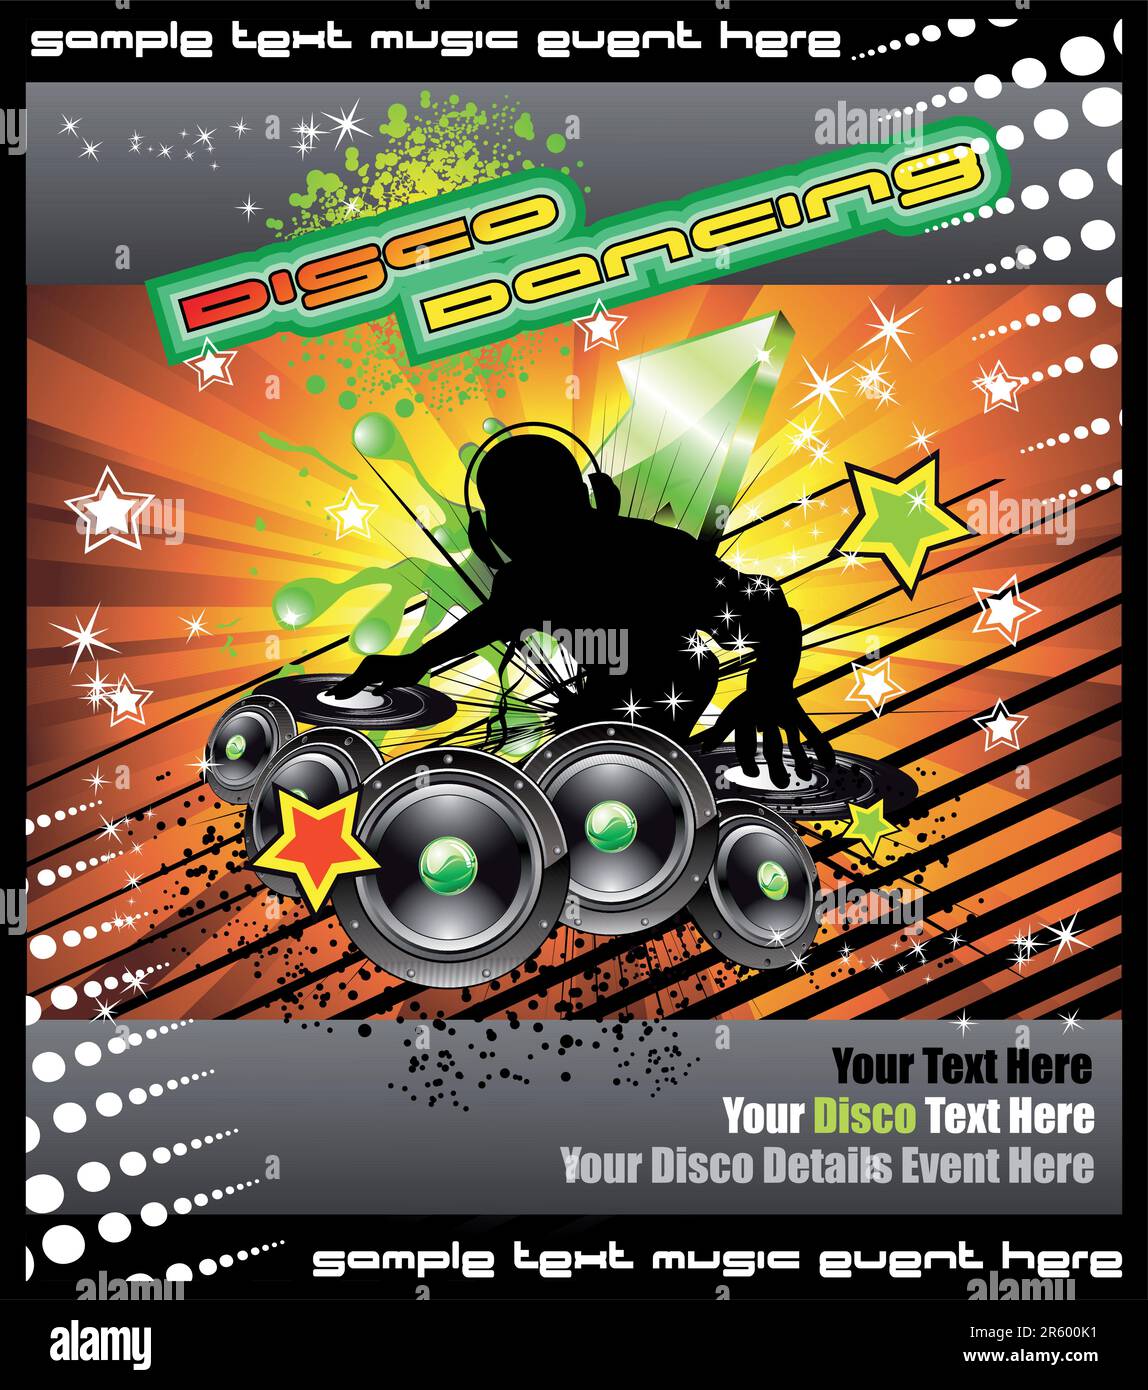 Colorful Disk Jockey Musical Event  Background for Disco Flyer Stock Vector